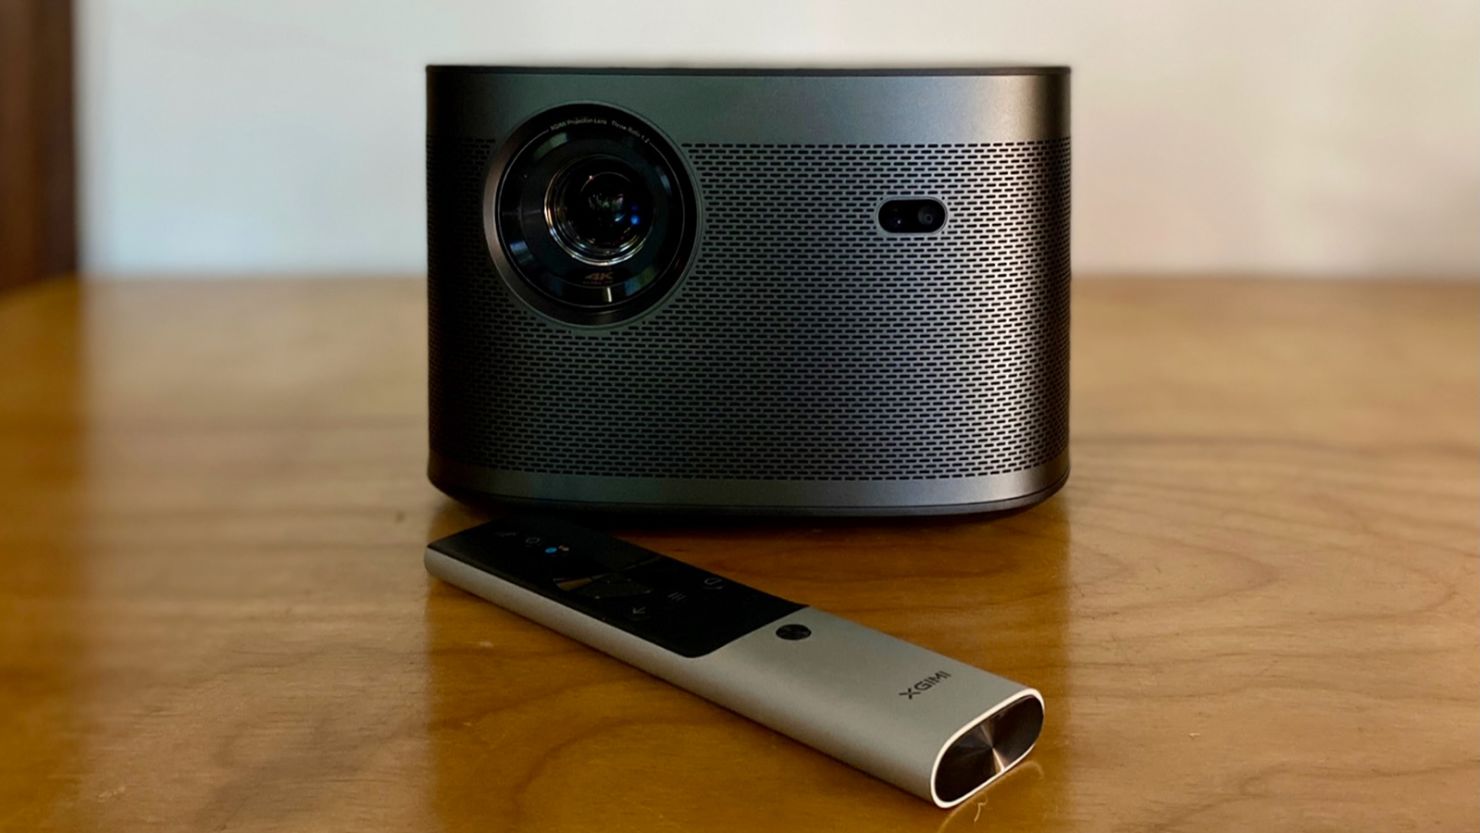 How To Connect Projector To Speakers